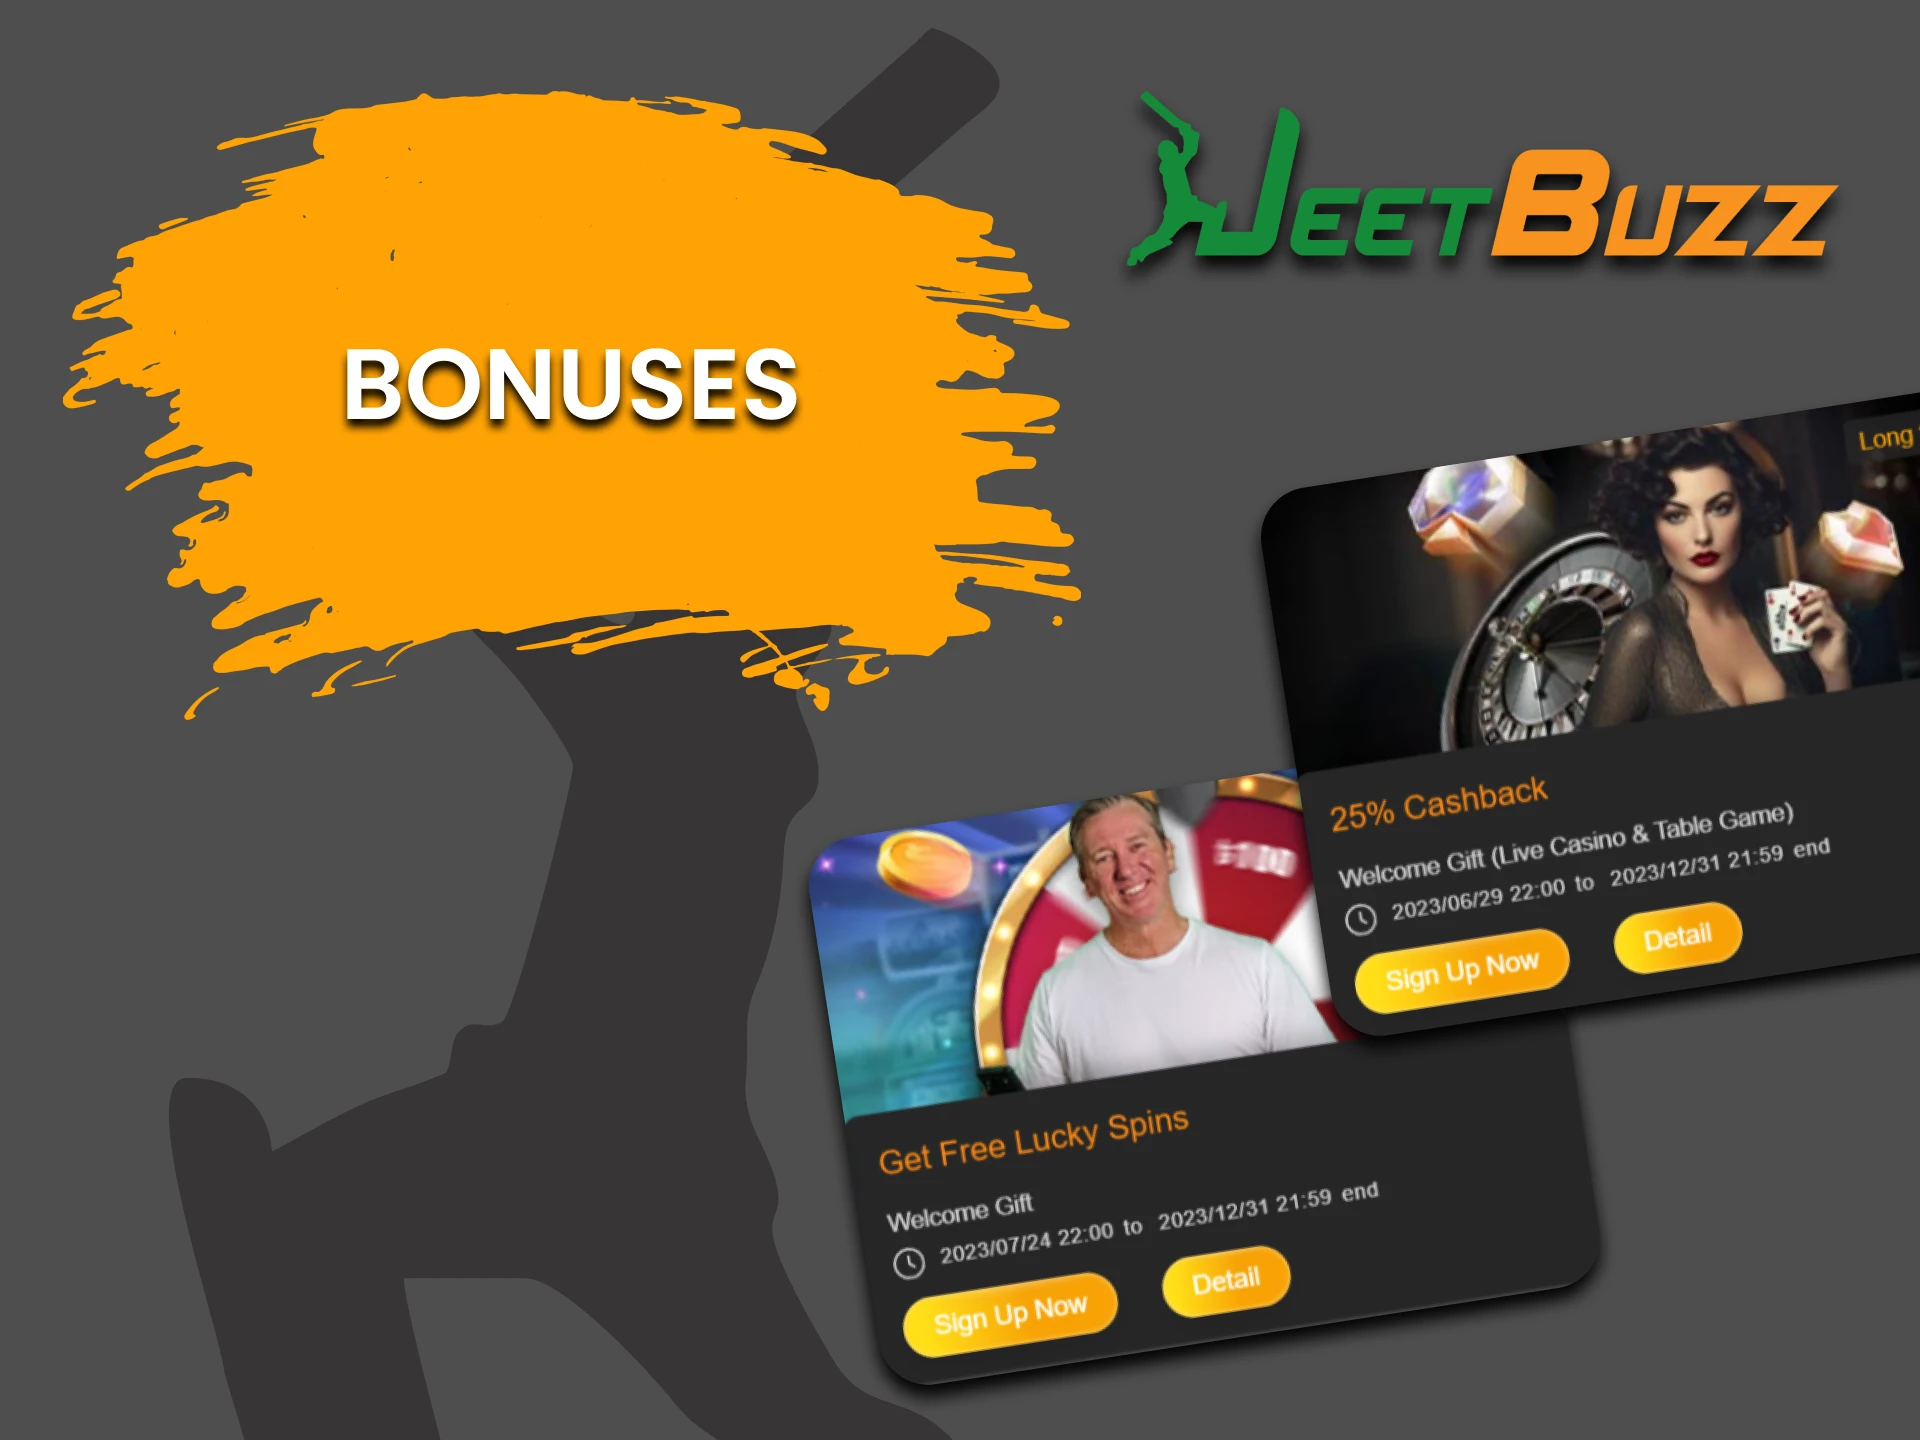 JeetBuzz gives bonuses for playing Slots.